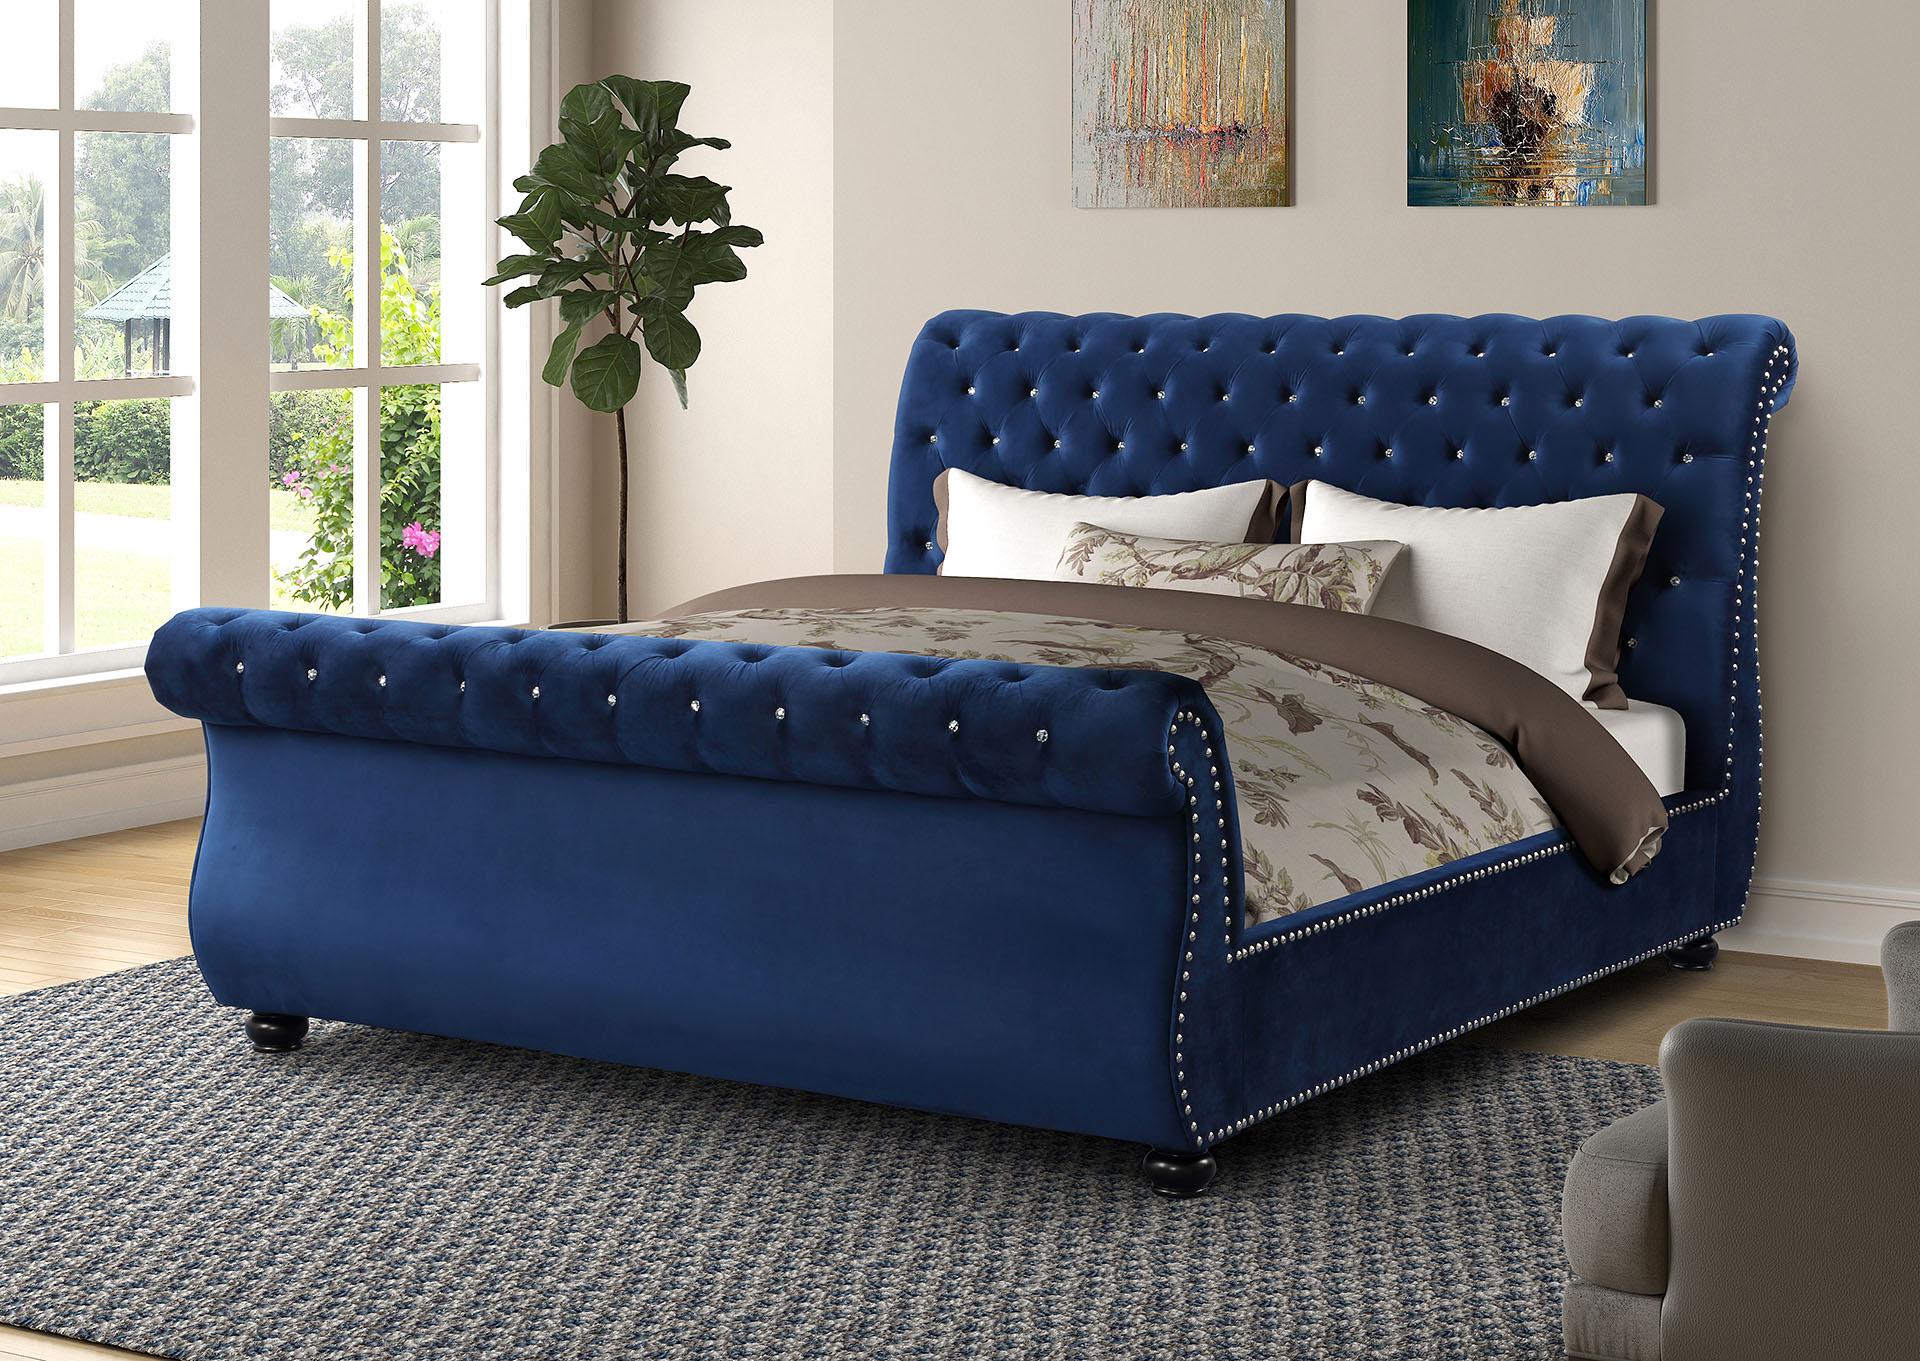 

    
Glam Blue Velvet Queen Bed Set 5Pcs w/VANITY KENDALL Galaxy Home Contemporary
